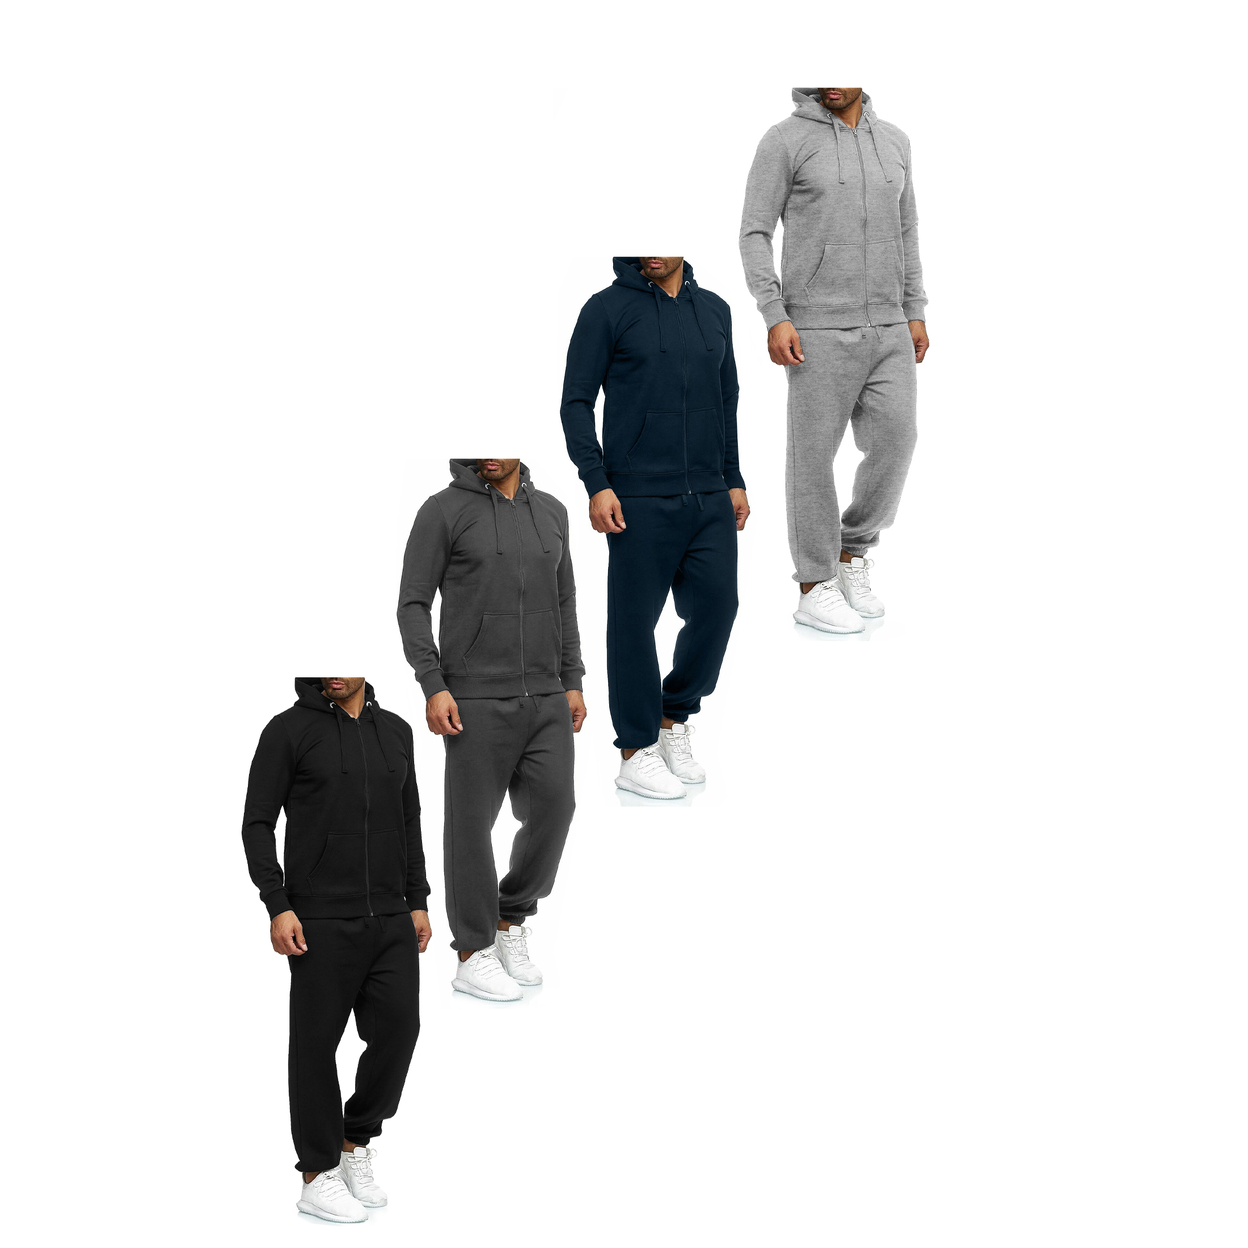 Men's Casual Big & Tall Athletic Active Winter Warm Fleece Lined Full Zip Tracksuit Jogger Set - Grey, X-large